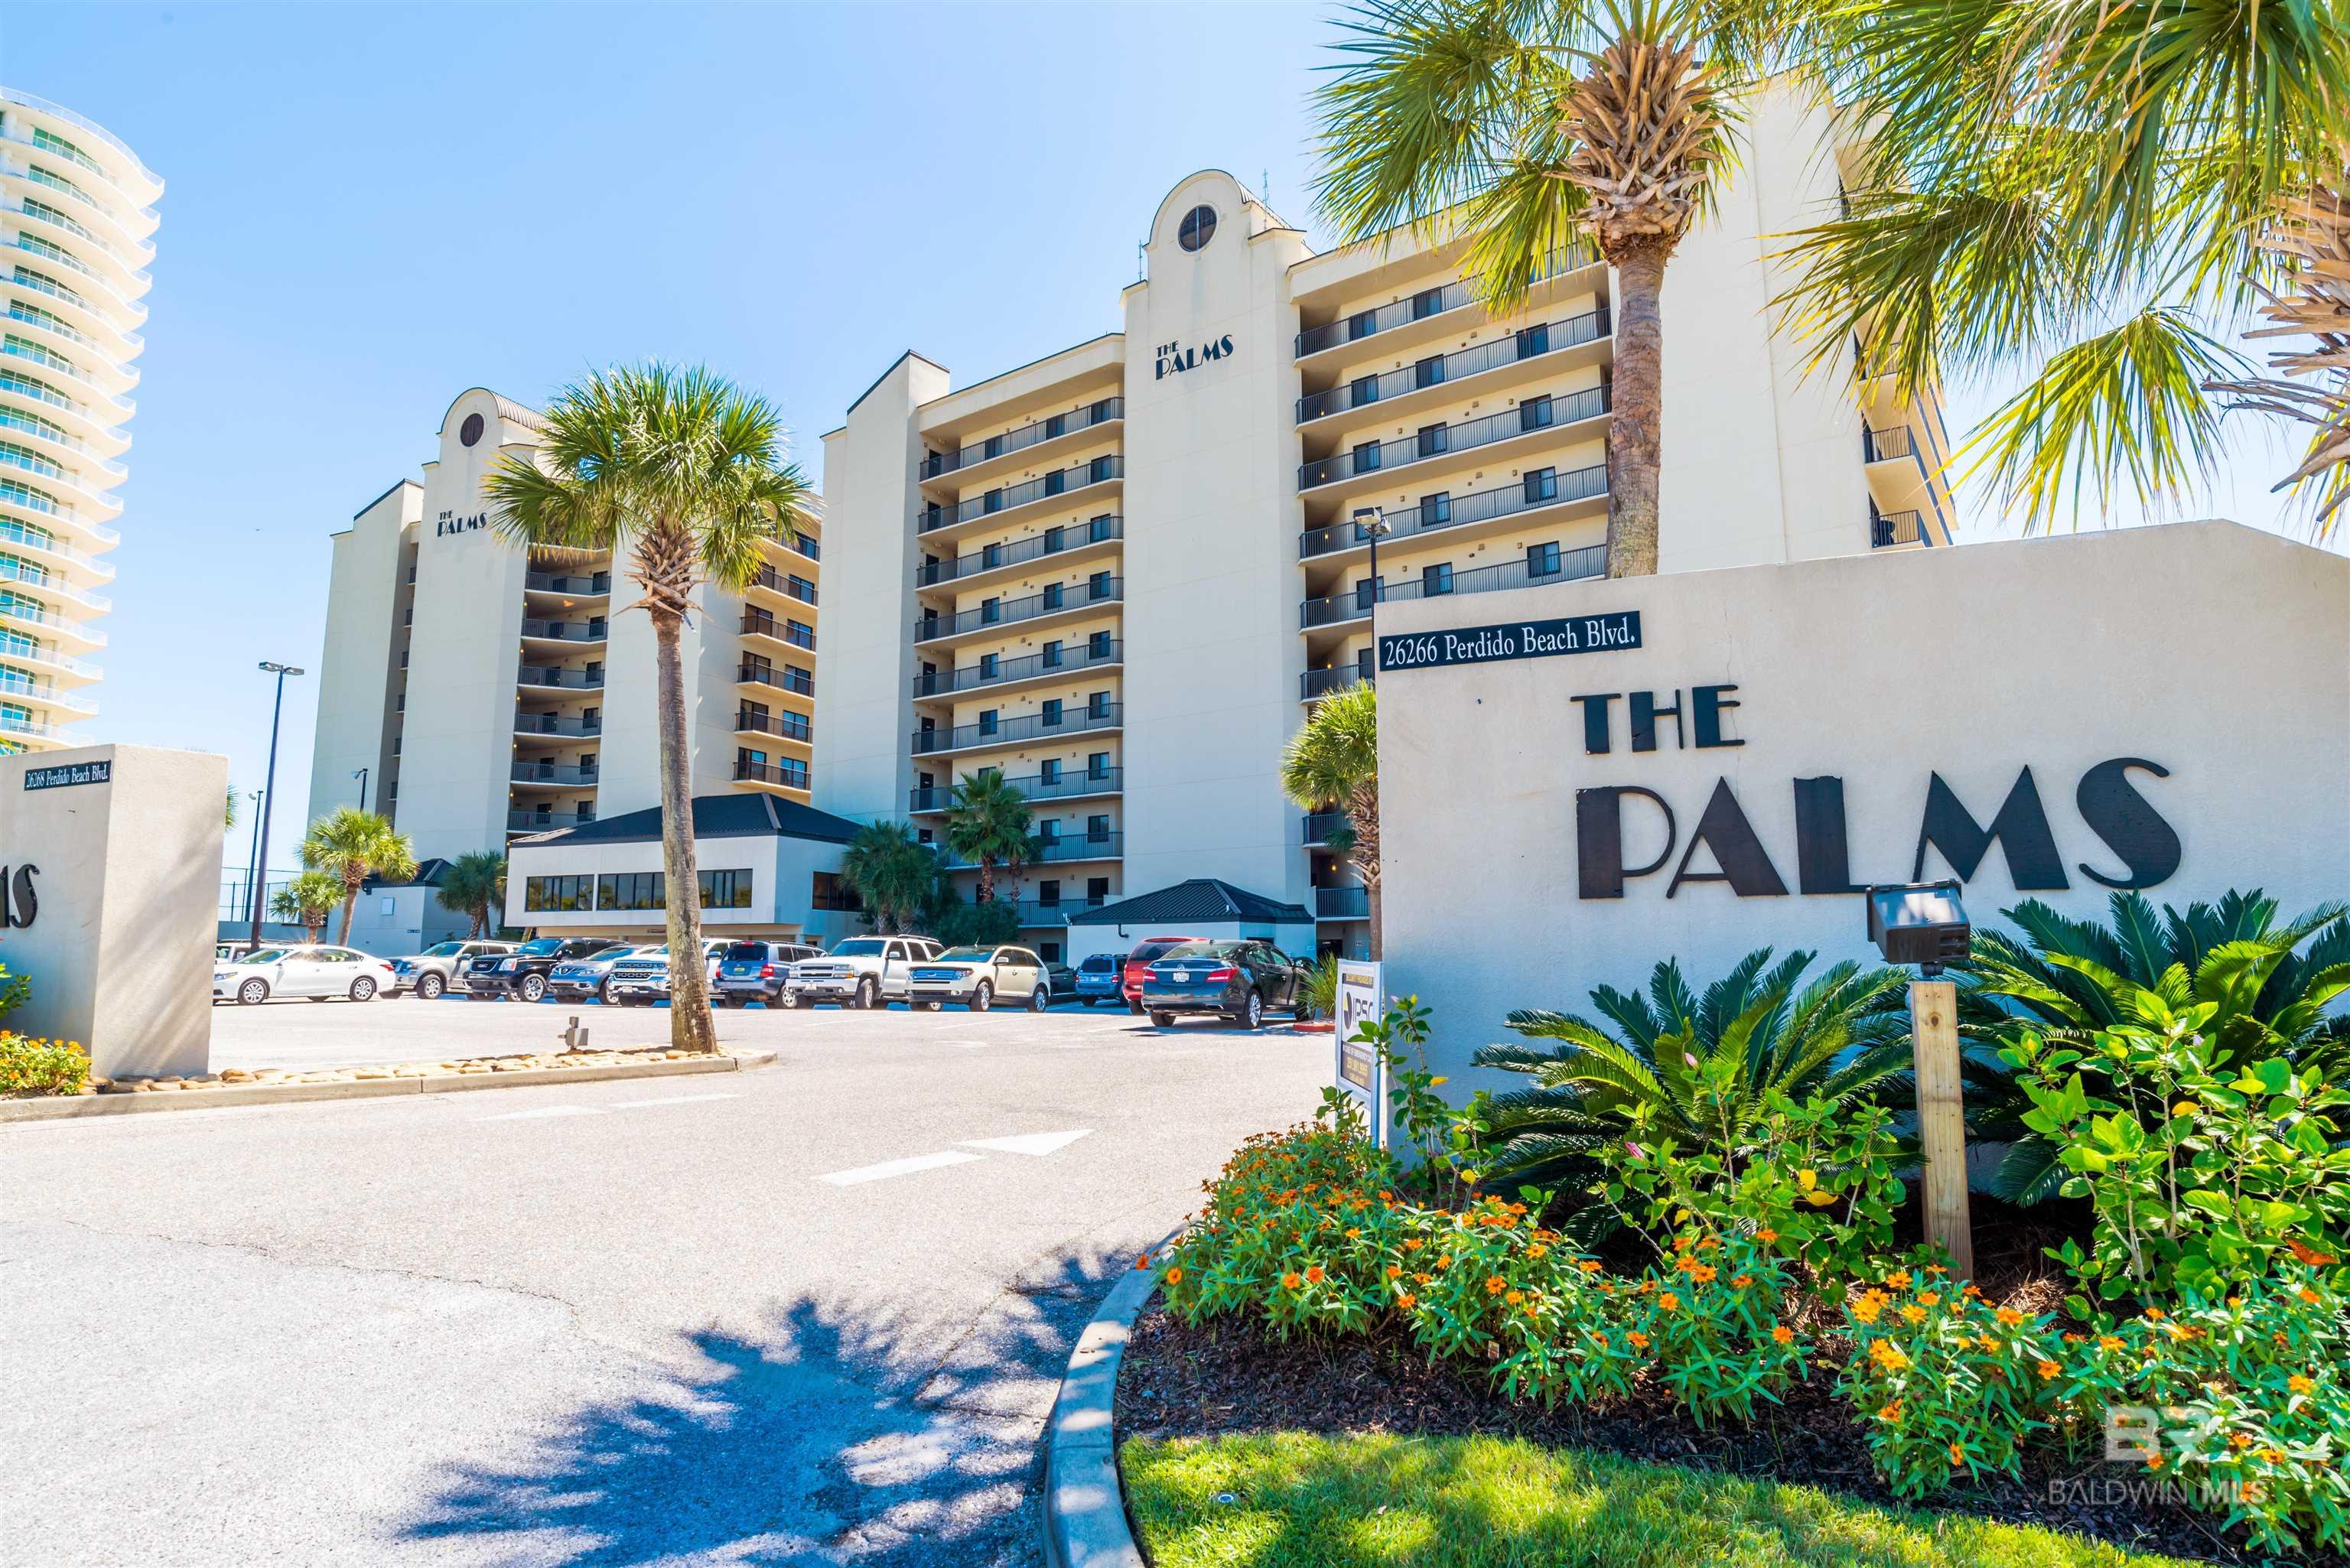 Welcome to The Palms in Orange Beach! This 6th floor large 2 bedroom 2 bathroom Gulf front condo is freshly painted throughout, walls, trim, and doors as well as having a new living room furniture and artwork. Enjoy views from the primary bedroom or walk out on the oversized balcony to relax. This condo offers a large kitchen with granite and is ready for your next getaway!! Schedule your showing today!